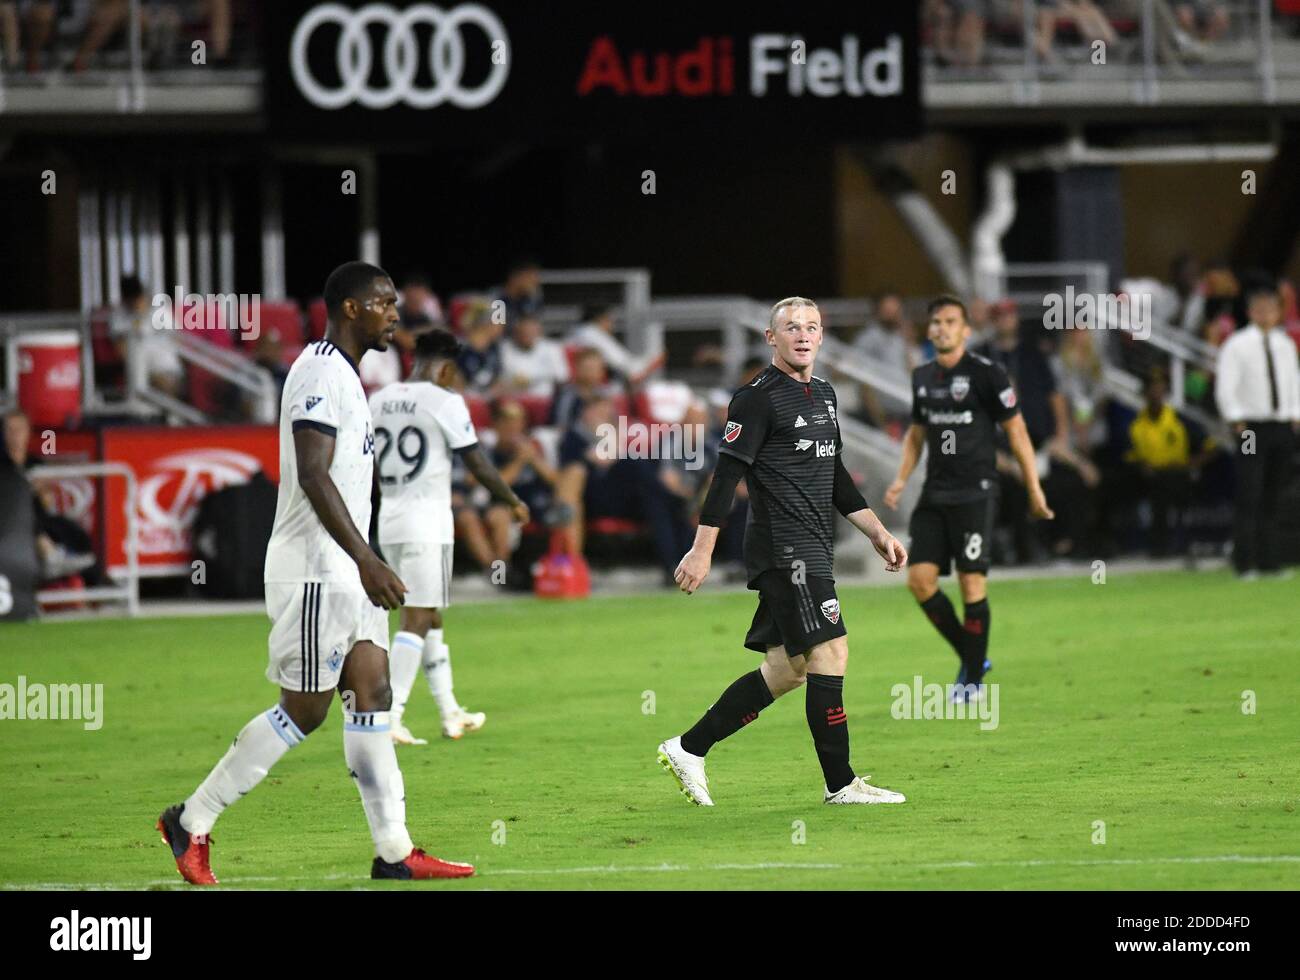 DC United player Wayne Rooney in action during the Major League Soccer match between D.C. United and Vancouver Whitecaps FC at the Audi Field Stadium on July 14, 2018 in Washington D.C. Photo by Olivier Douliery/ Abaca Press Stock Photo